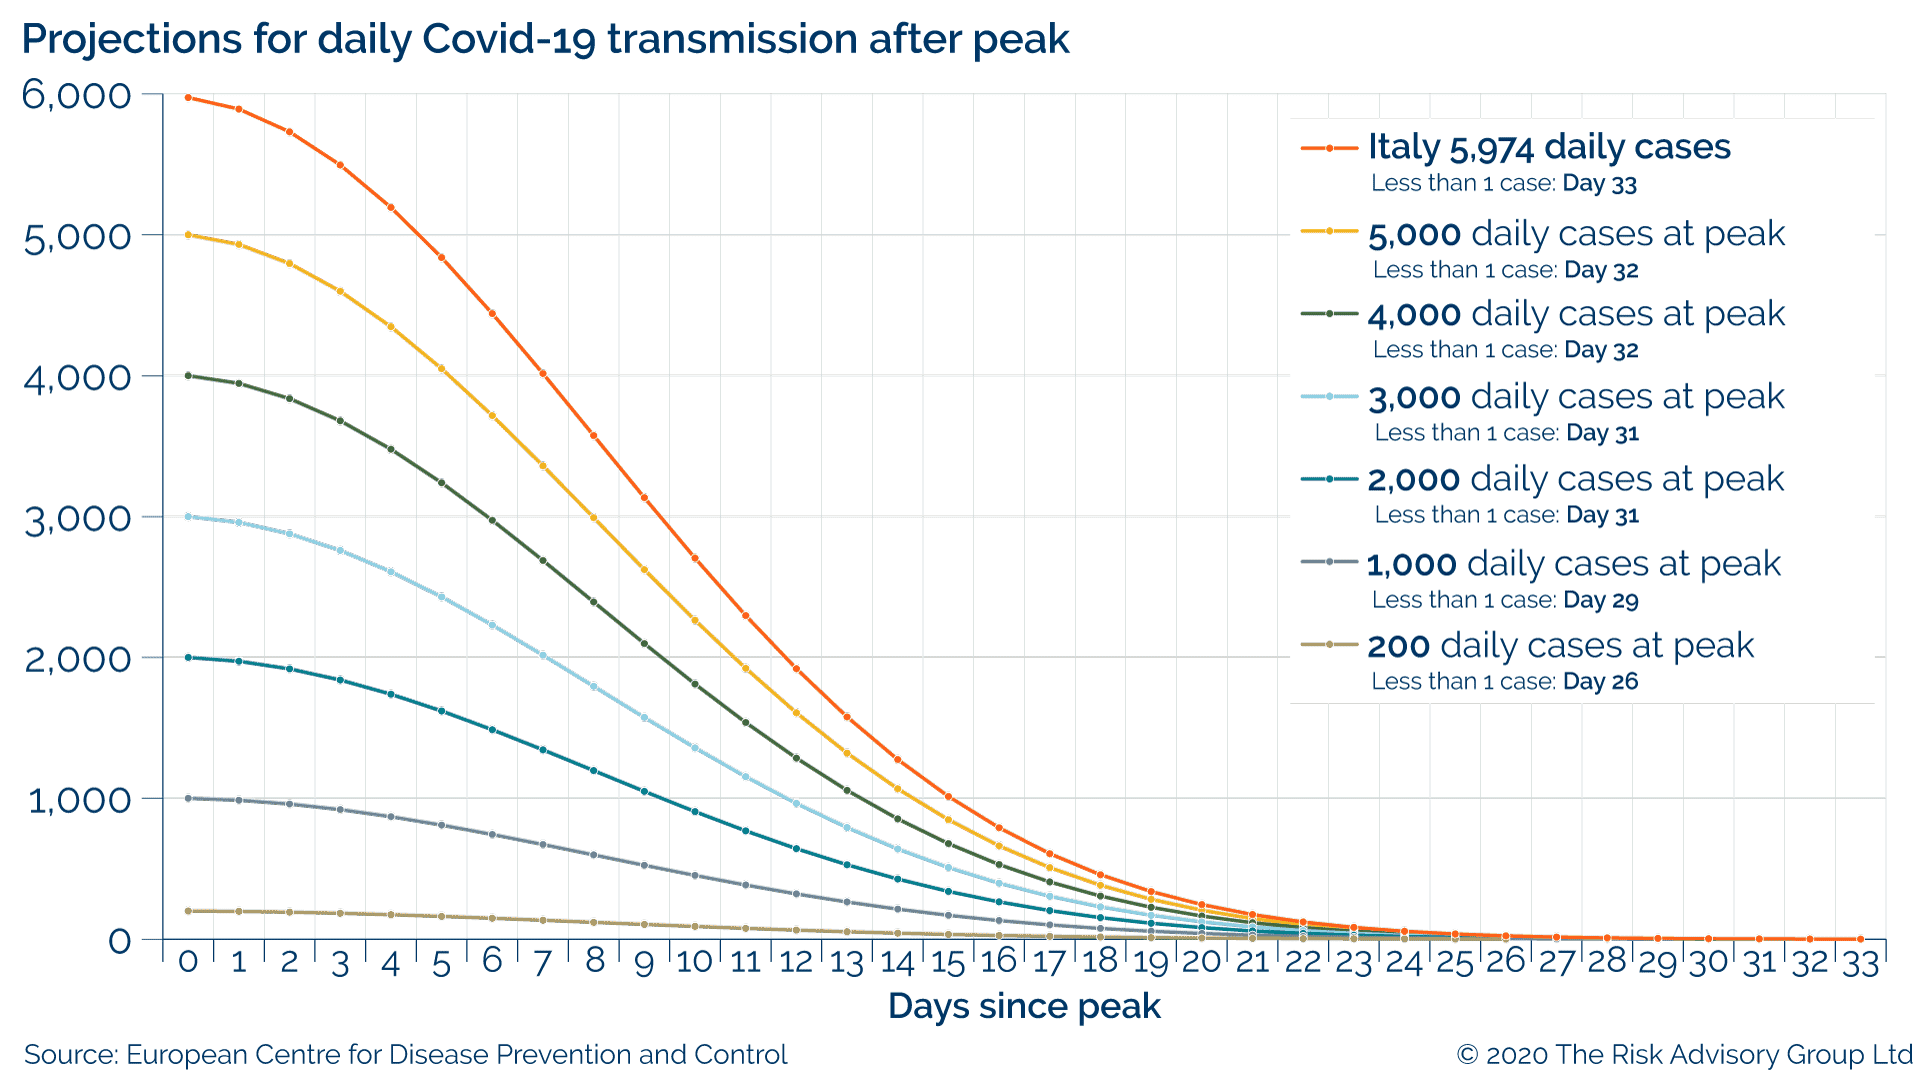 Projections for COVID-19 transmission after peak